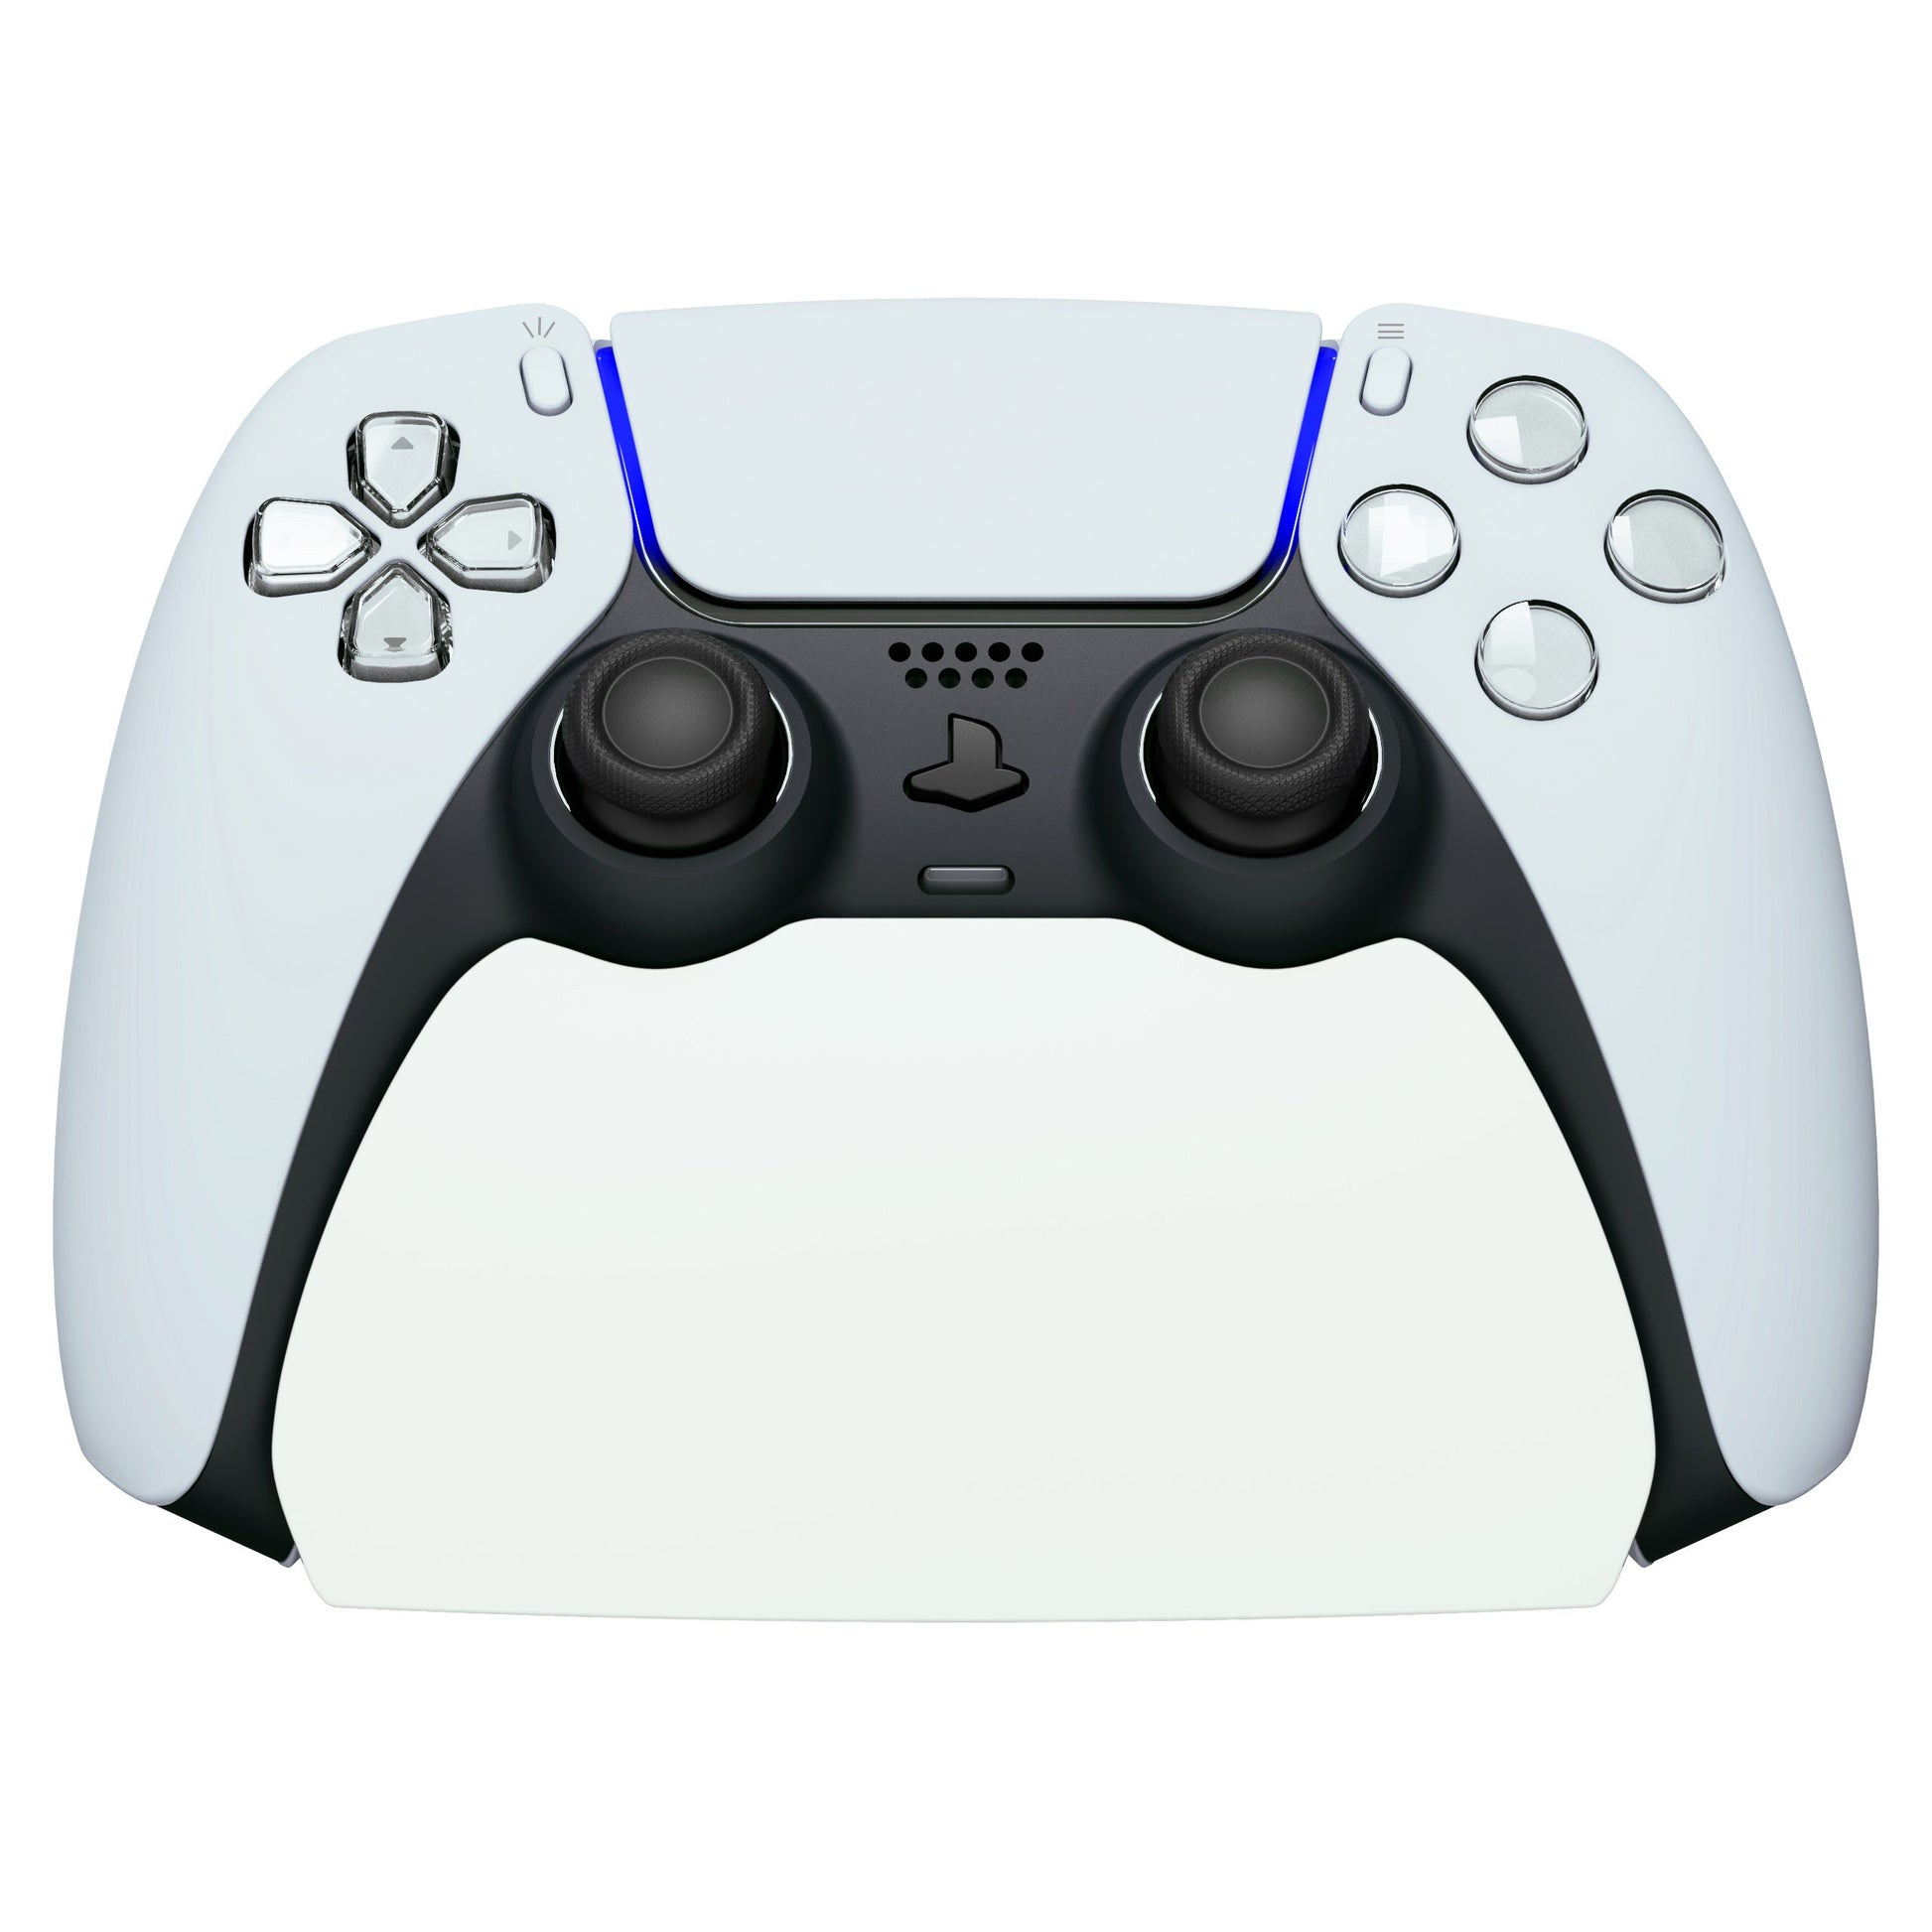  PlayVital White Controller Display Stand for ps5, Gamepad  Accessories Desk Holder for ps5 Controller with Rubber Pads : Video Games